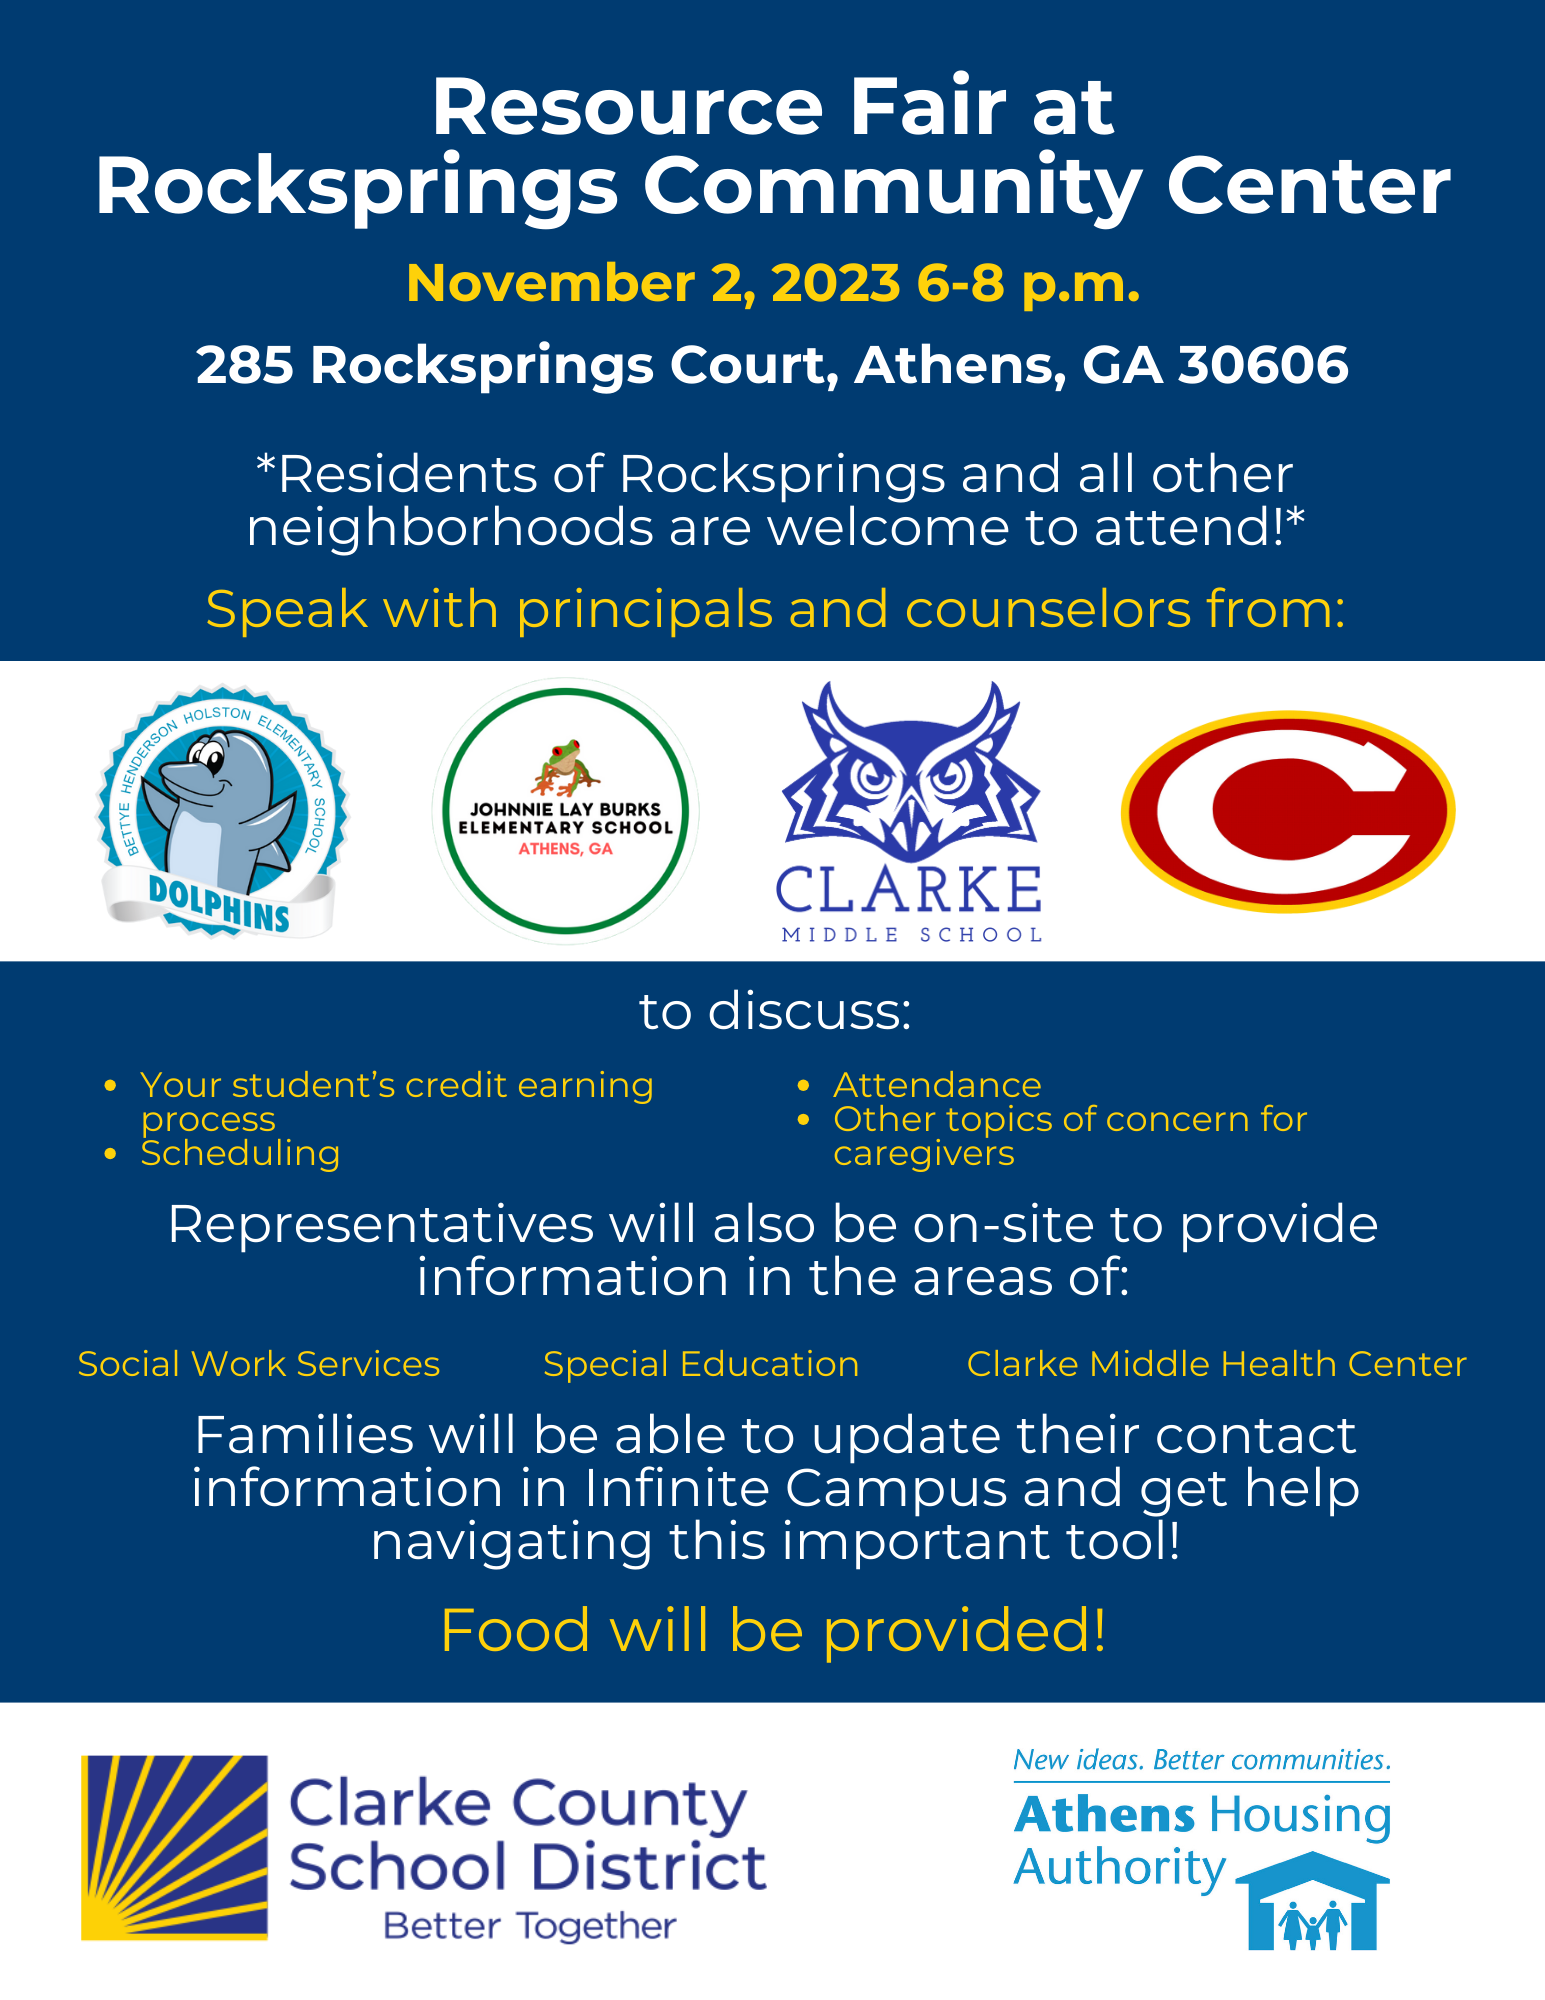 CCSD to Hold Community Resource Fair on Nov. 2